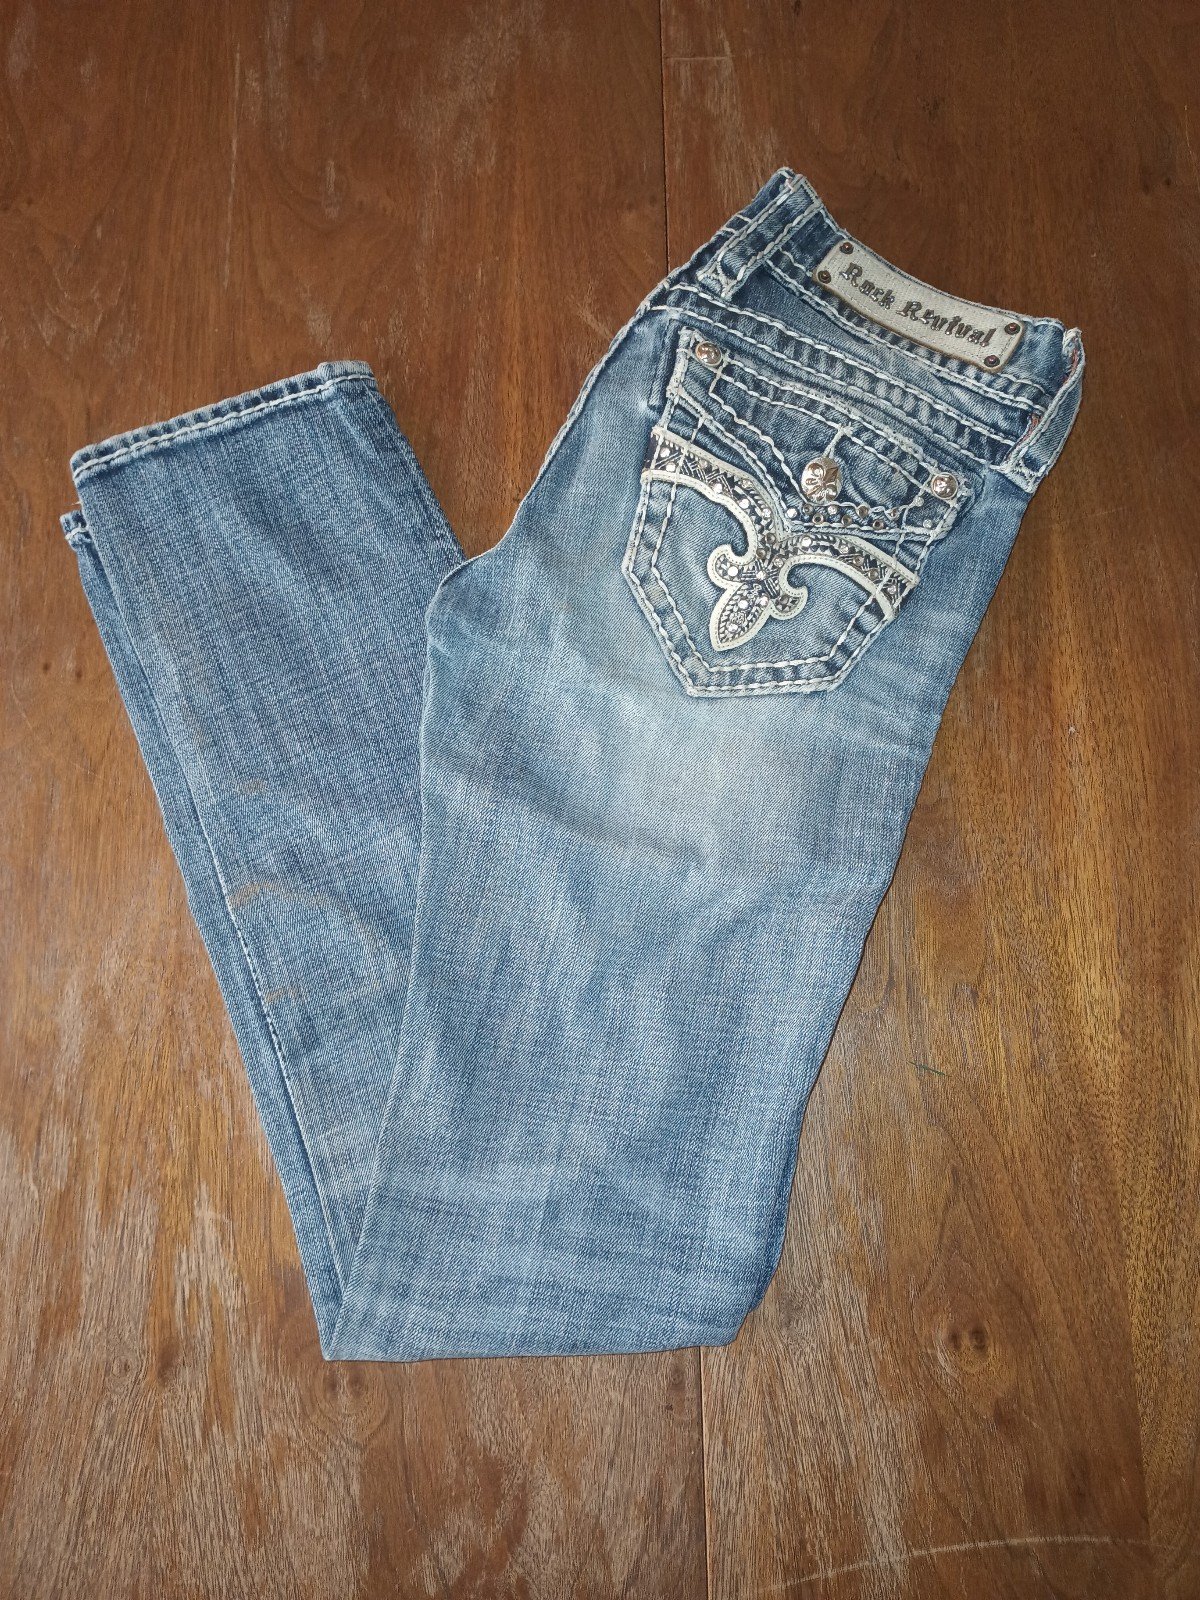 Latest  Rock Revival jeans women distressed size 26 NxEBfMqDg just for you